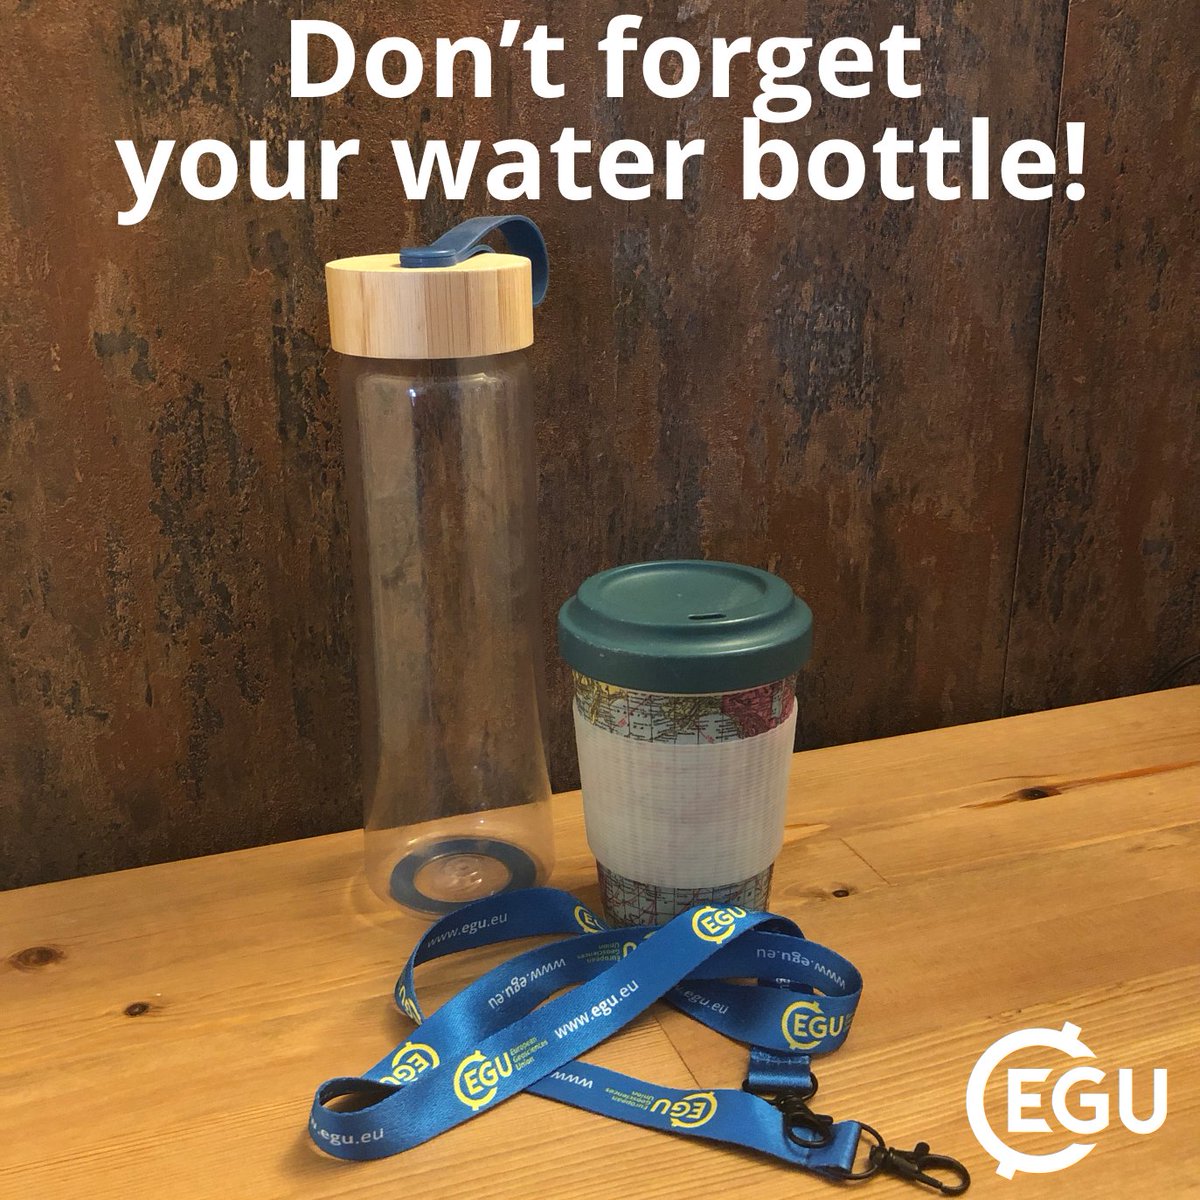 Are you packing for #EGU24? Don't forget to bring your water bottle, reusable coffee cup and old EGU lanyard if you have one! Get more #GreenEGU tips: egu.eu/4Q9VXW/